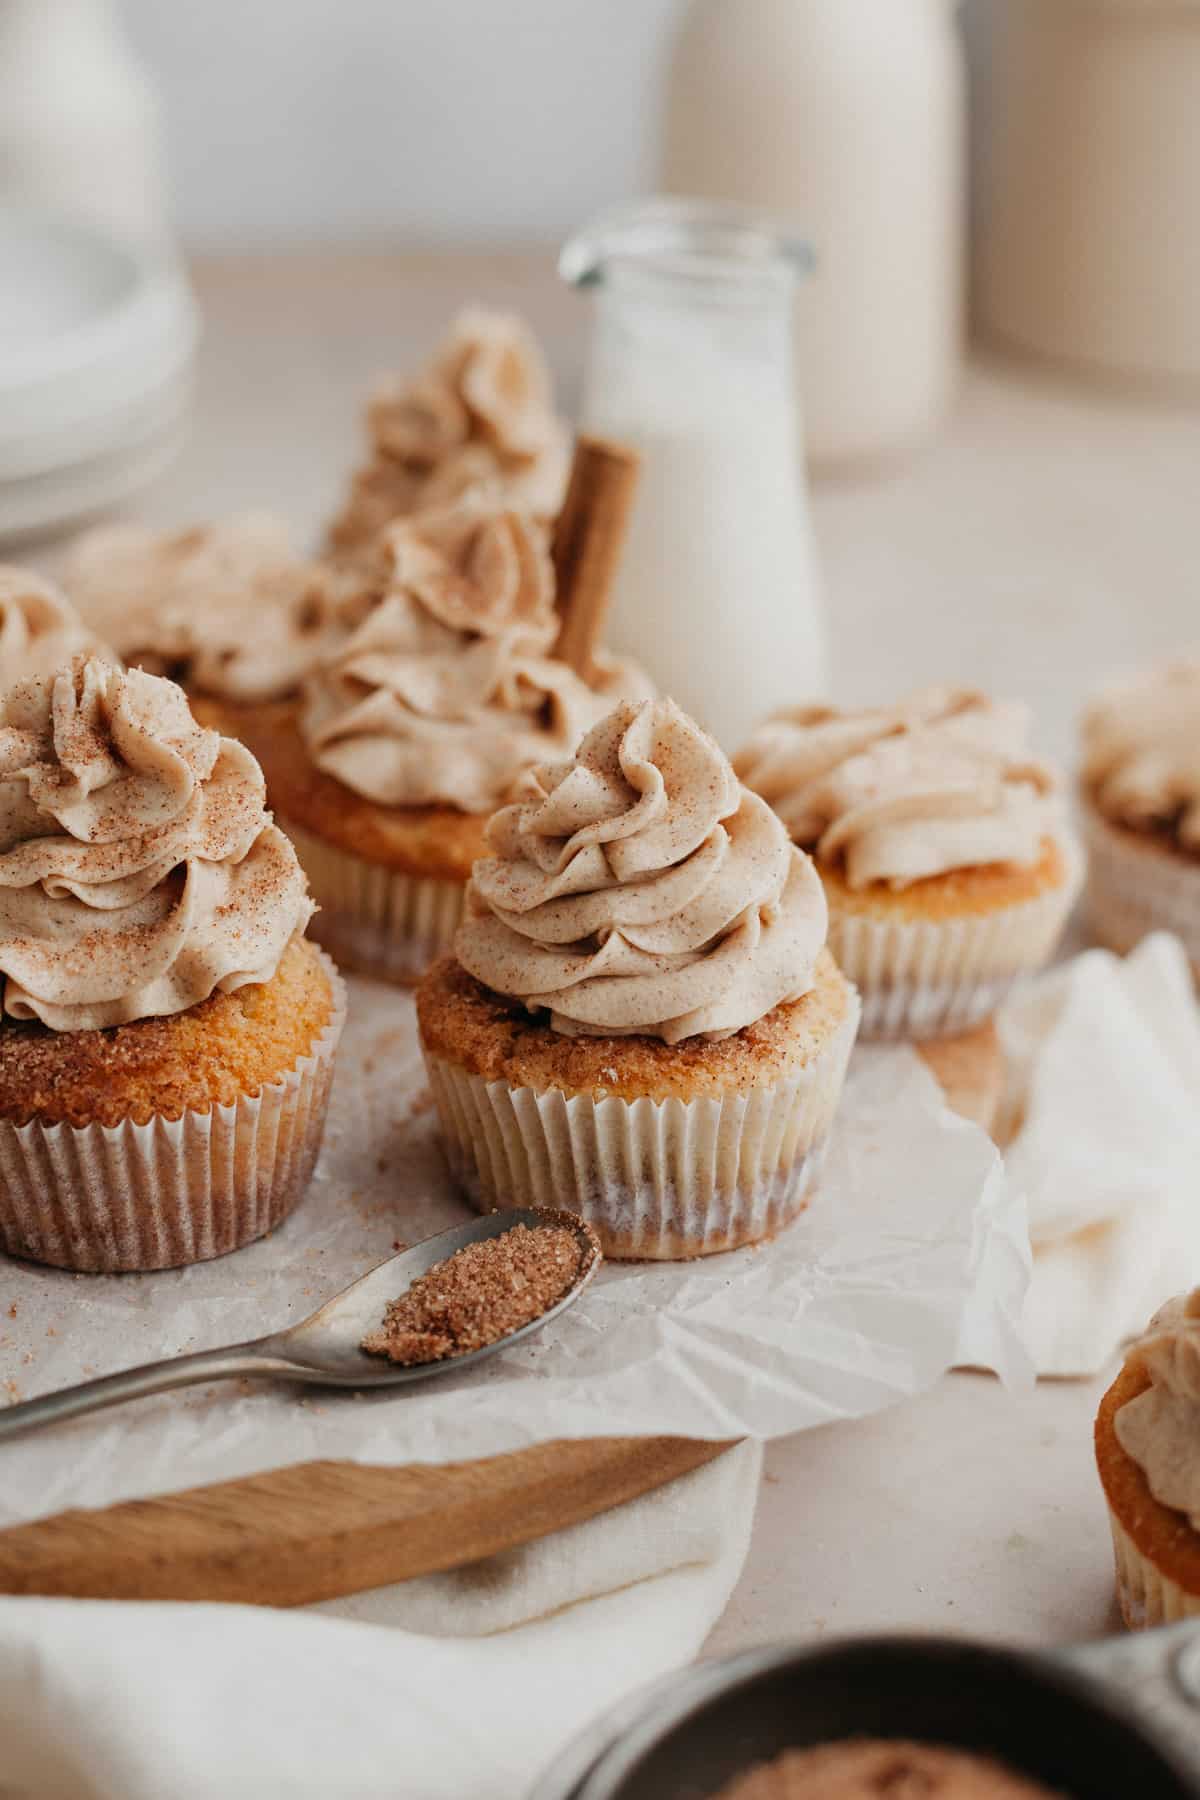 Several frosted cupcakes on parchment paper.